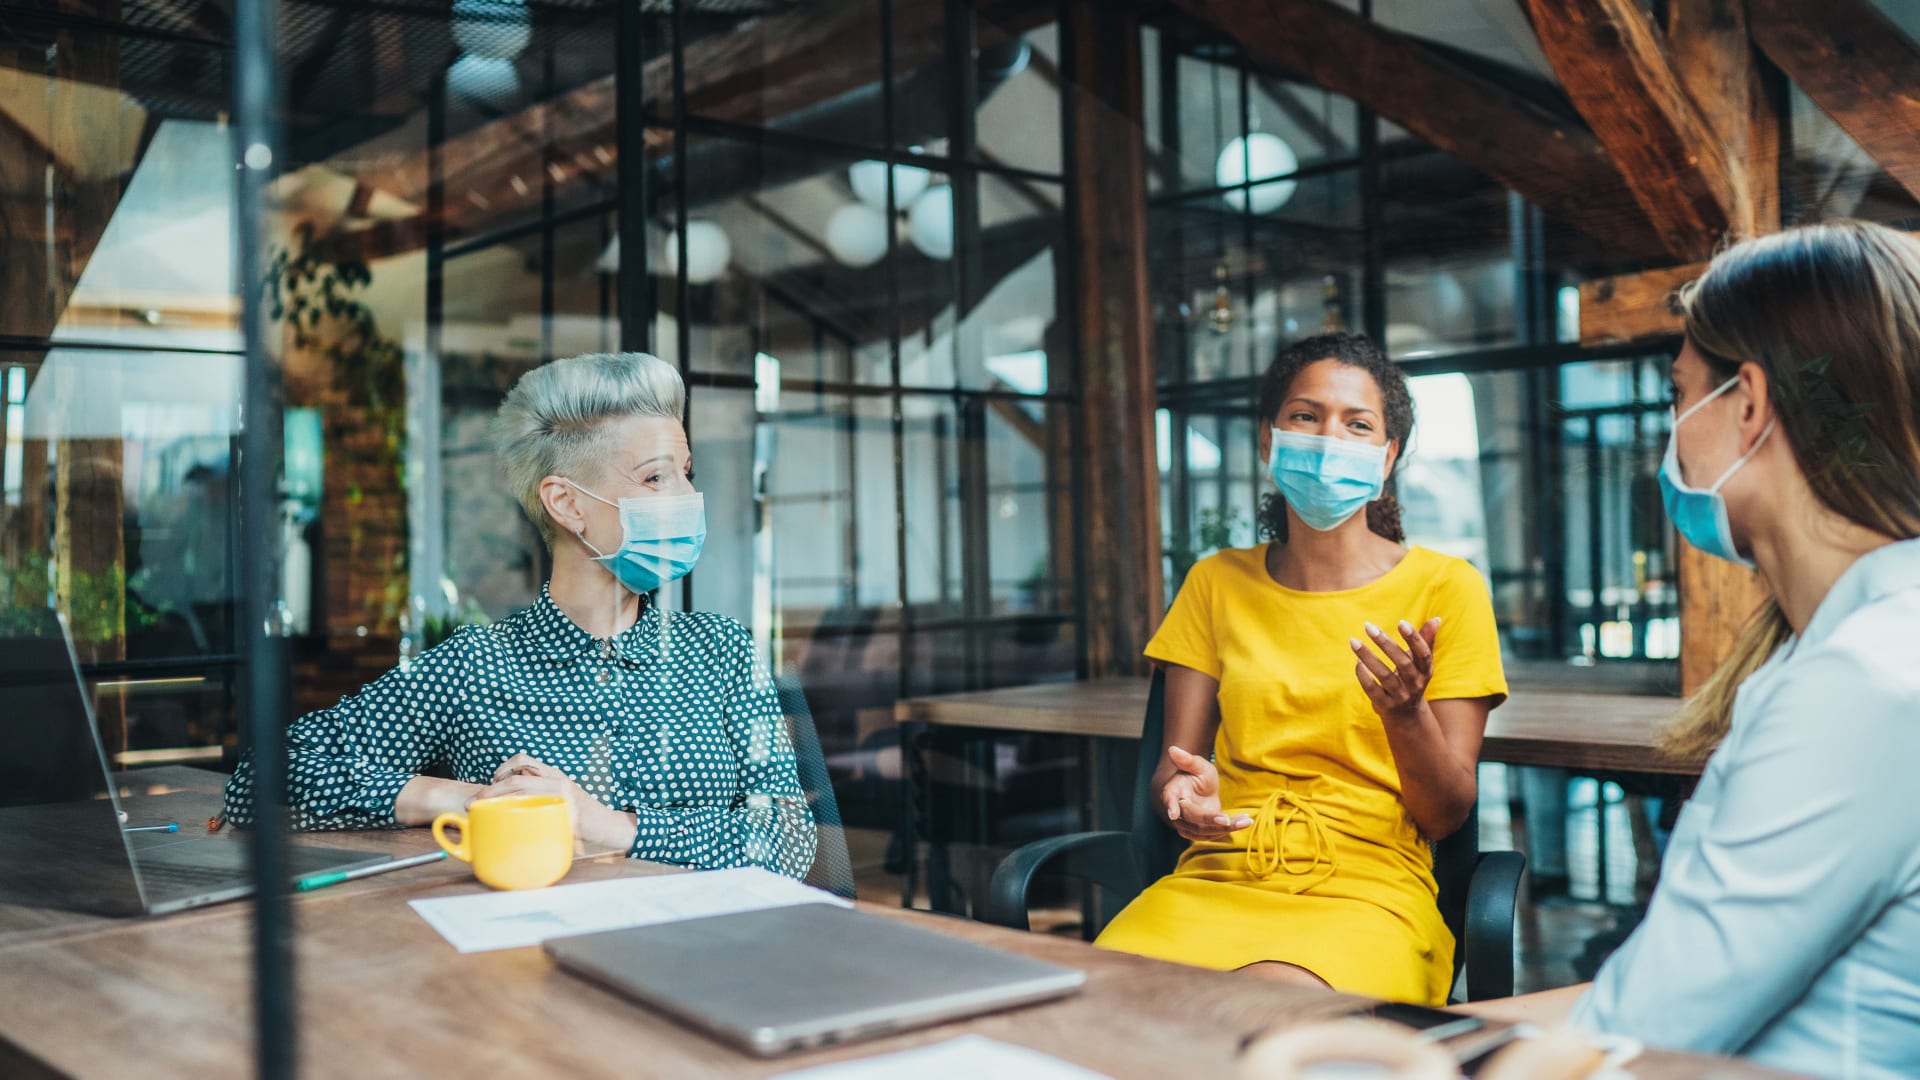 A 3-Step Return-to-Work Strategy for Companies Coming Out of the Pandemic